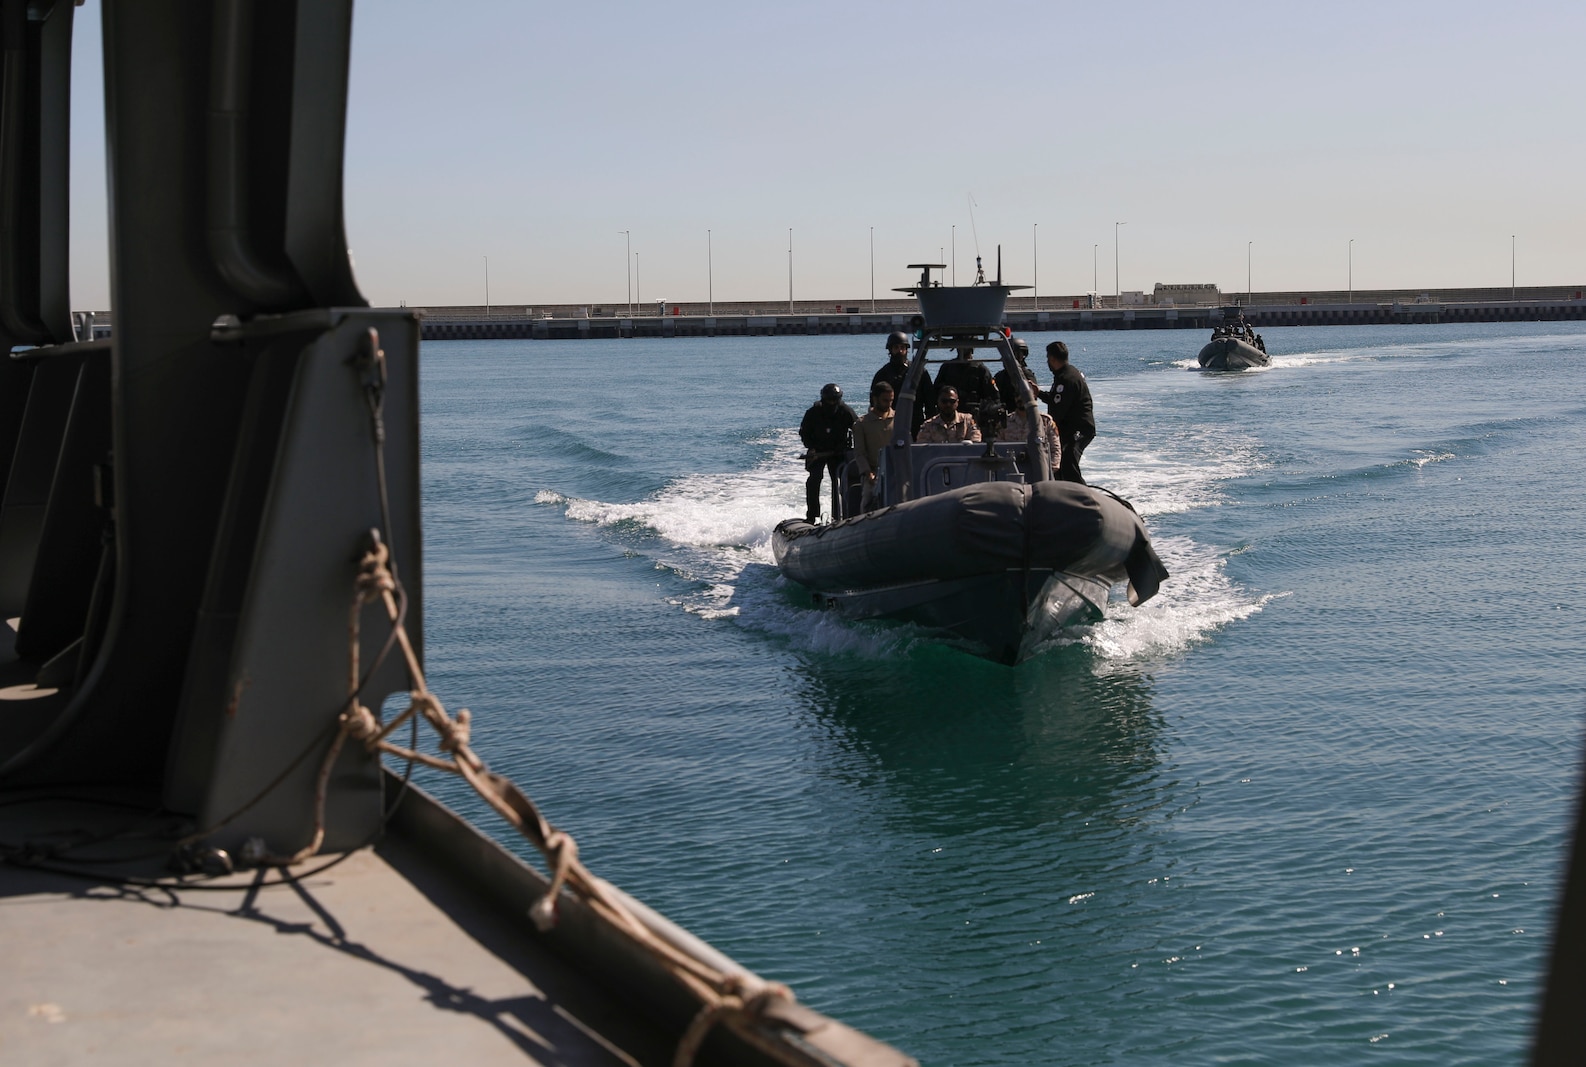 240203-M-IU565-2010 MUHAMMAD AL AHMED NAVAL BASE, Kuwait (Feb. 3, 2024) Partner nation service members conduct a visit, board, search, and seizure demonstration during exercise Eager Defender 24 onboard Muhammad Al Ahmed Naval Base, Kuwait, Feb. 3. Eager Defender 24 is the capstone in a series of bilateral exercises between Kuwait and U.S. naval forces, focused on enhancing mutual capabilities and interoperability in maritime security operations. (U.S. Marine Corps photo)